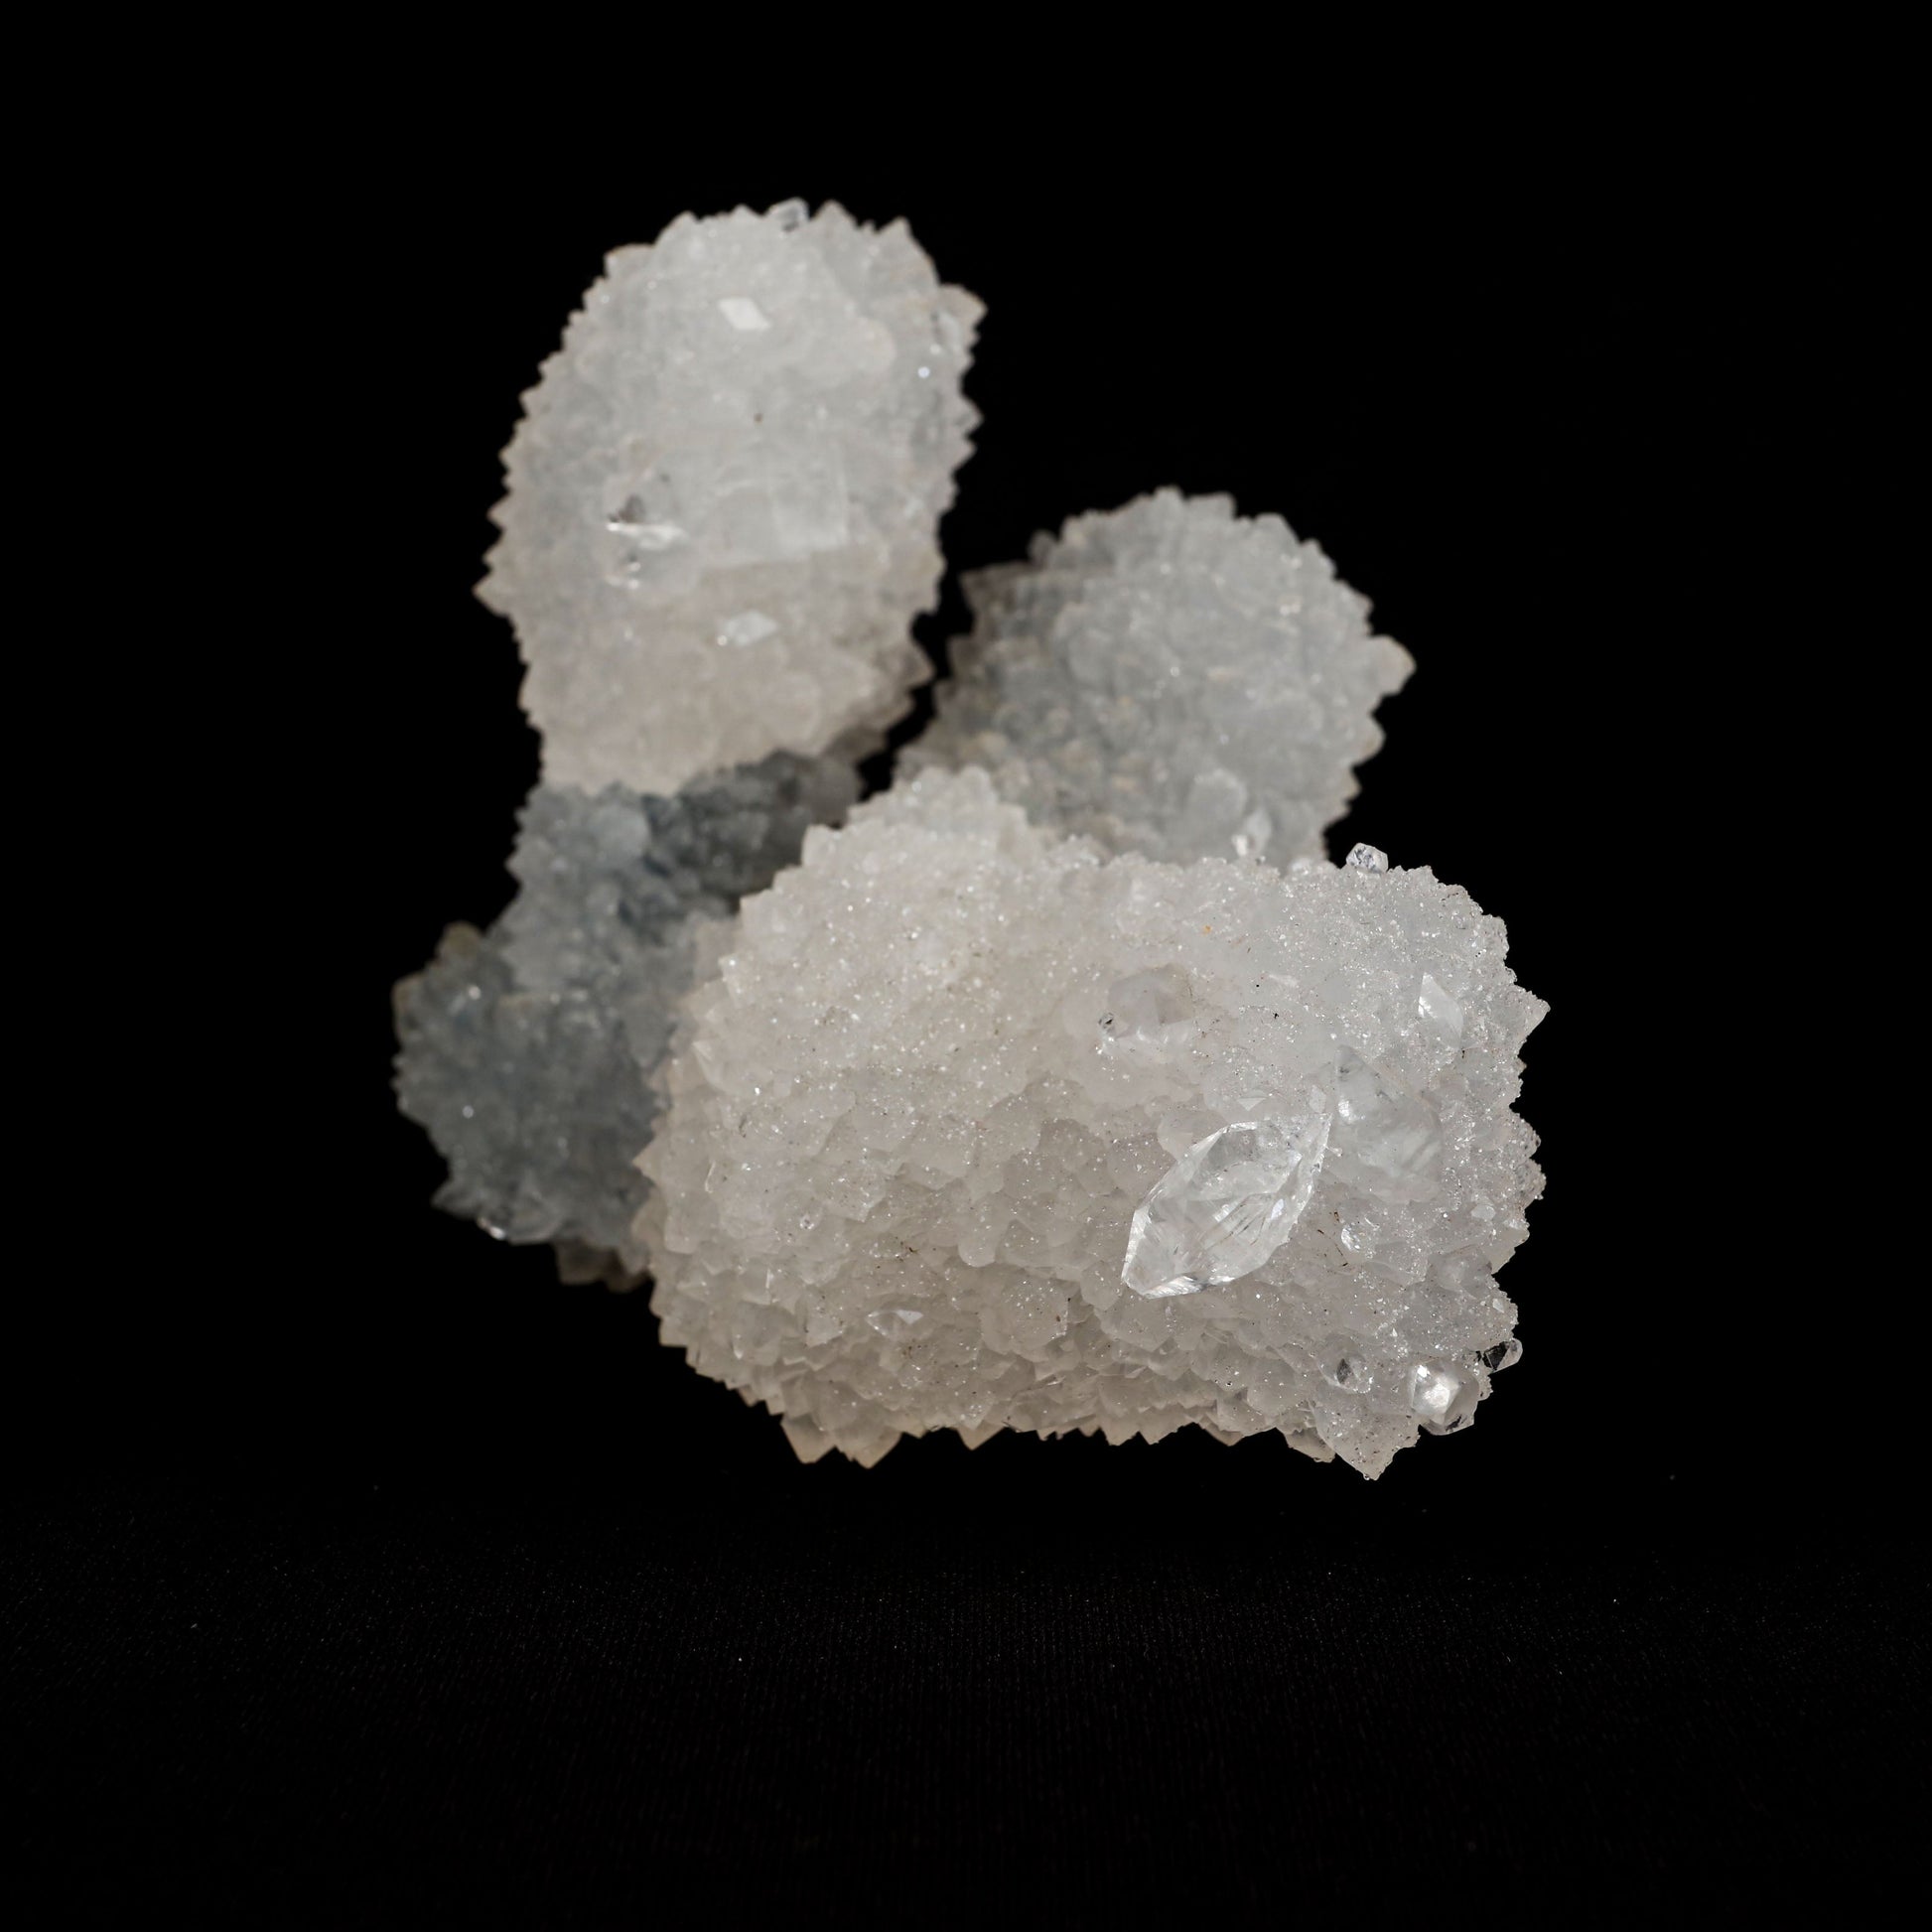 Coated Calcite On MM Quartz Natural Mineral Specimen # B 4998  https://www.superbminerals.us/products/coated-calcite-on-mm-quartz-natural-mineral-specimen-b-4998  Features:&nbsp;Scepter-shaped formation (wider cap on the end of a narrower stem) of translucent colorless calcite crystals coated on the stem with colorless quartz crystals. The calcite crystals are coated on termination. A very aesthetic piece&nbsp; In excellent condition.Primary Mineral(s): Coated Calcite